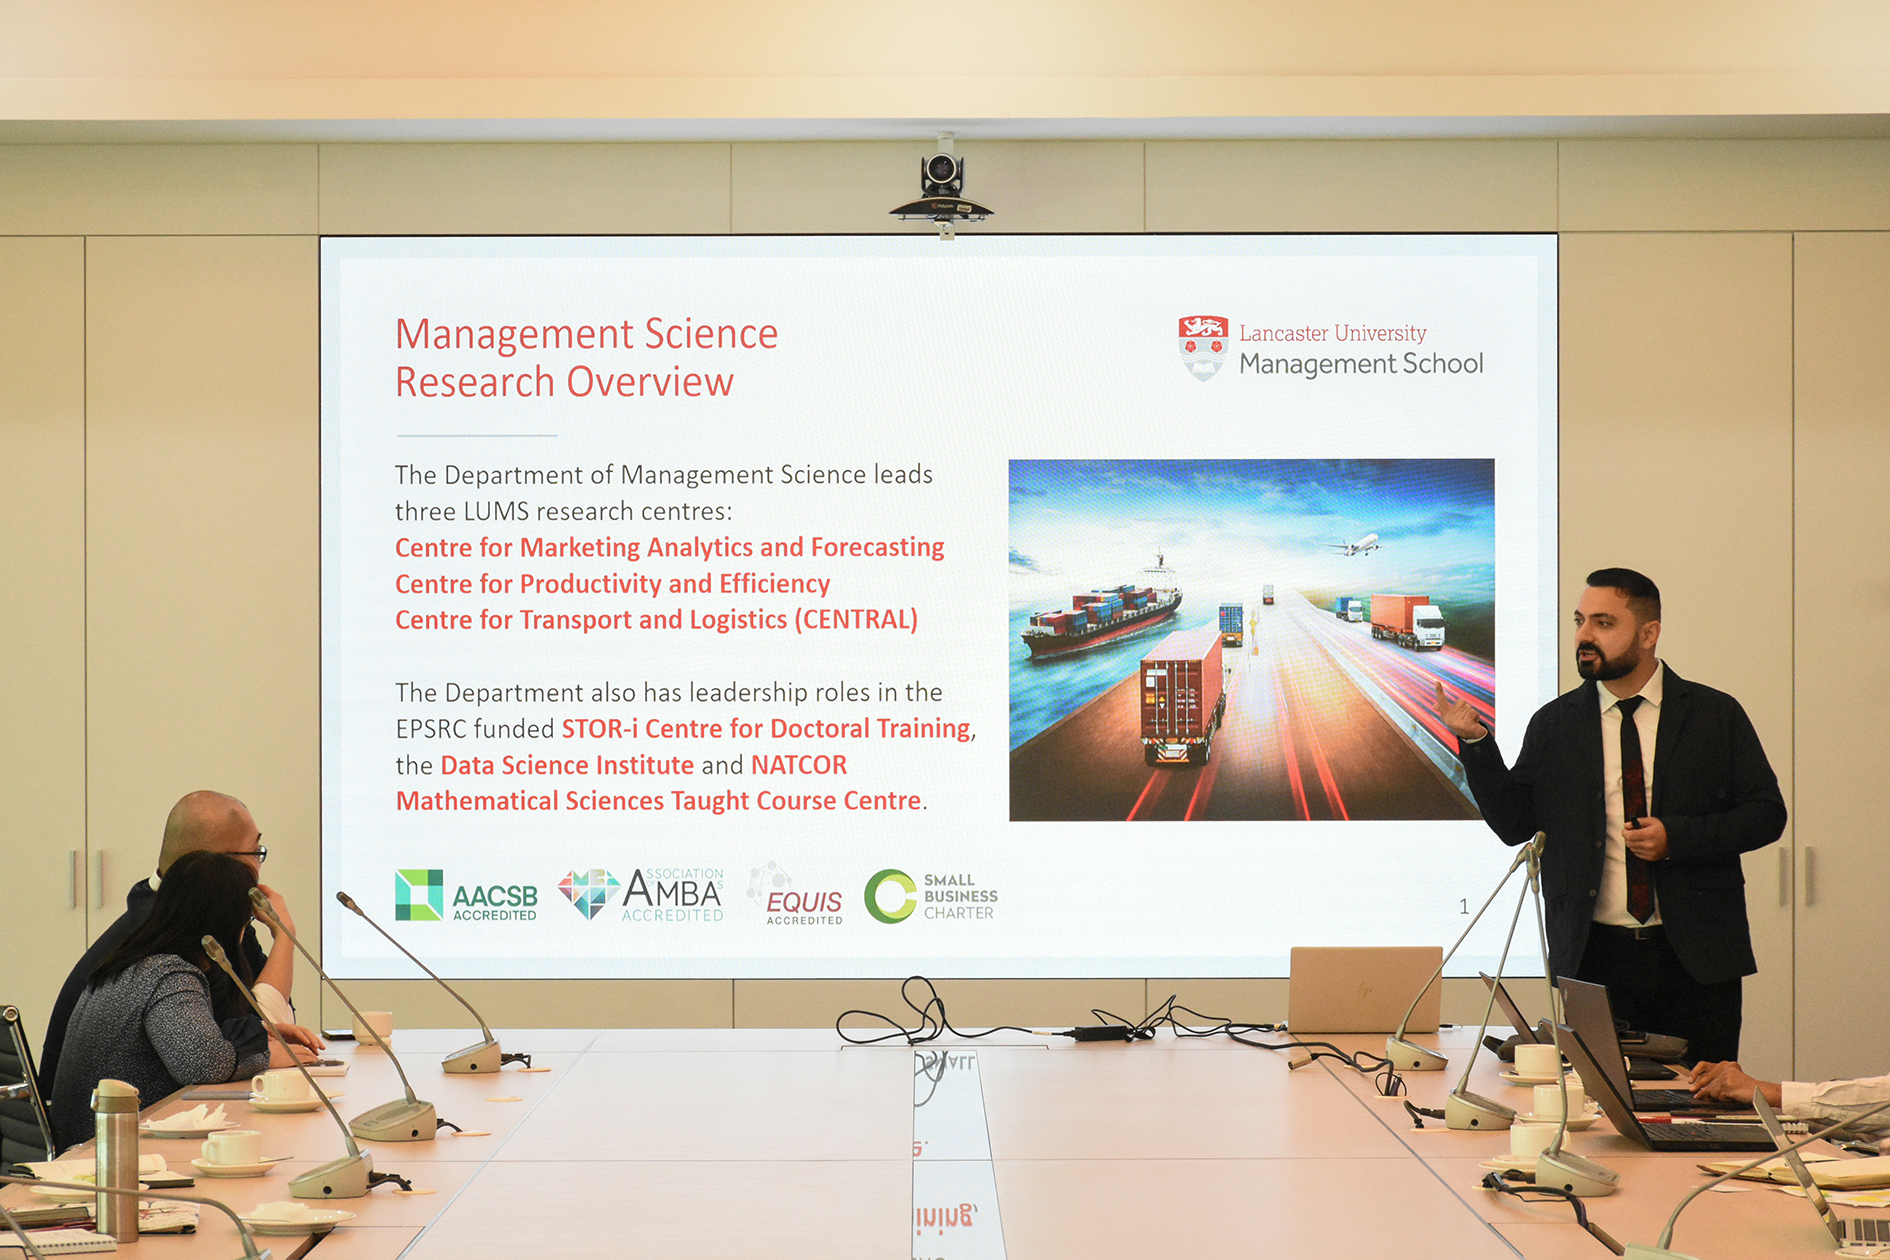 Dr Amjad Fayoumi gives a presentation at Sunway Business School, speaking in front of a large screen displaying a PowerPoint presentation about the Department of Management Science's research